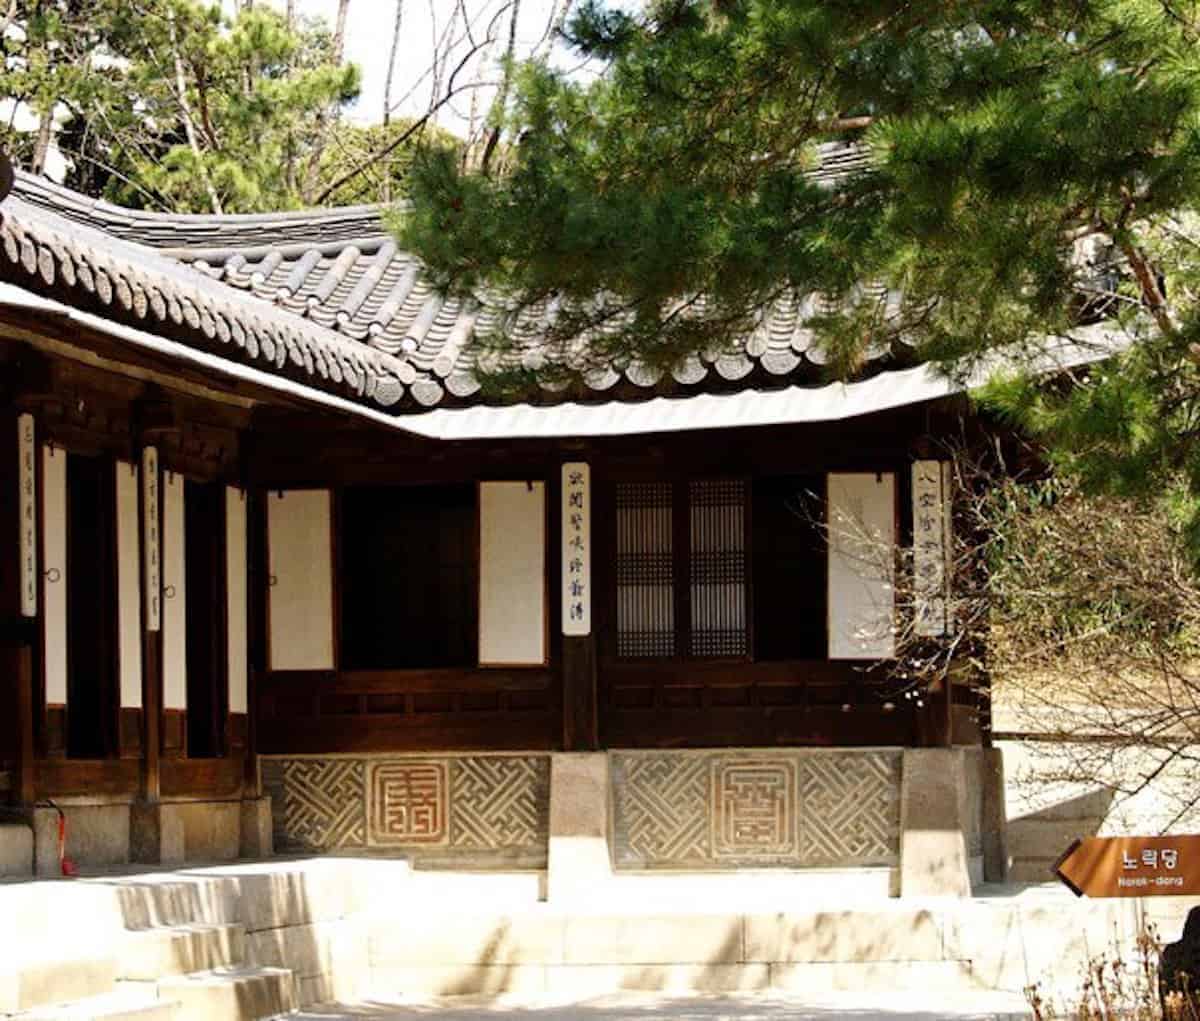 A hanok, or a traditional Korean house made of wood, in Seoul.